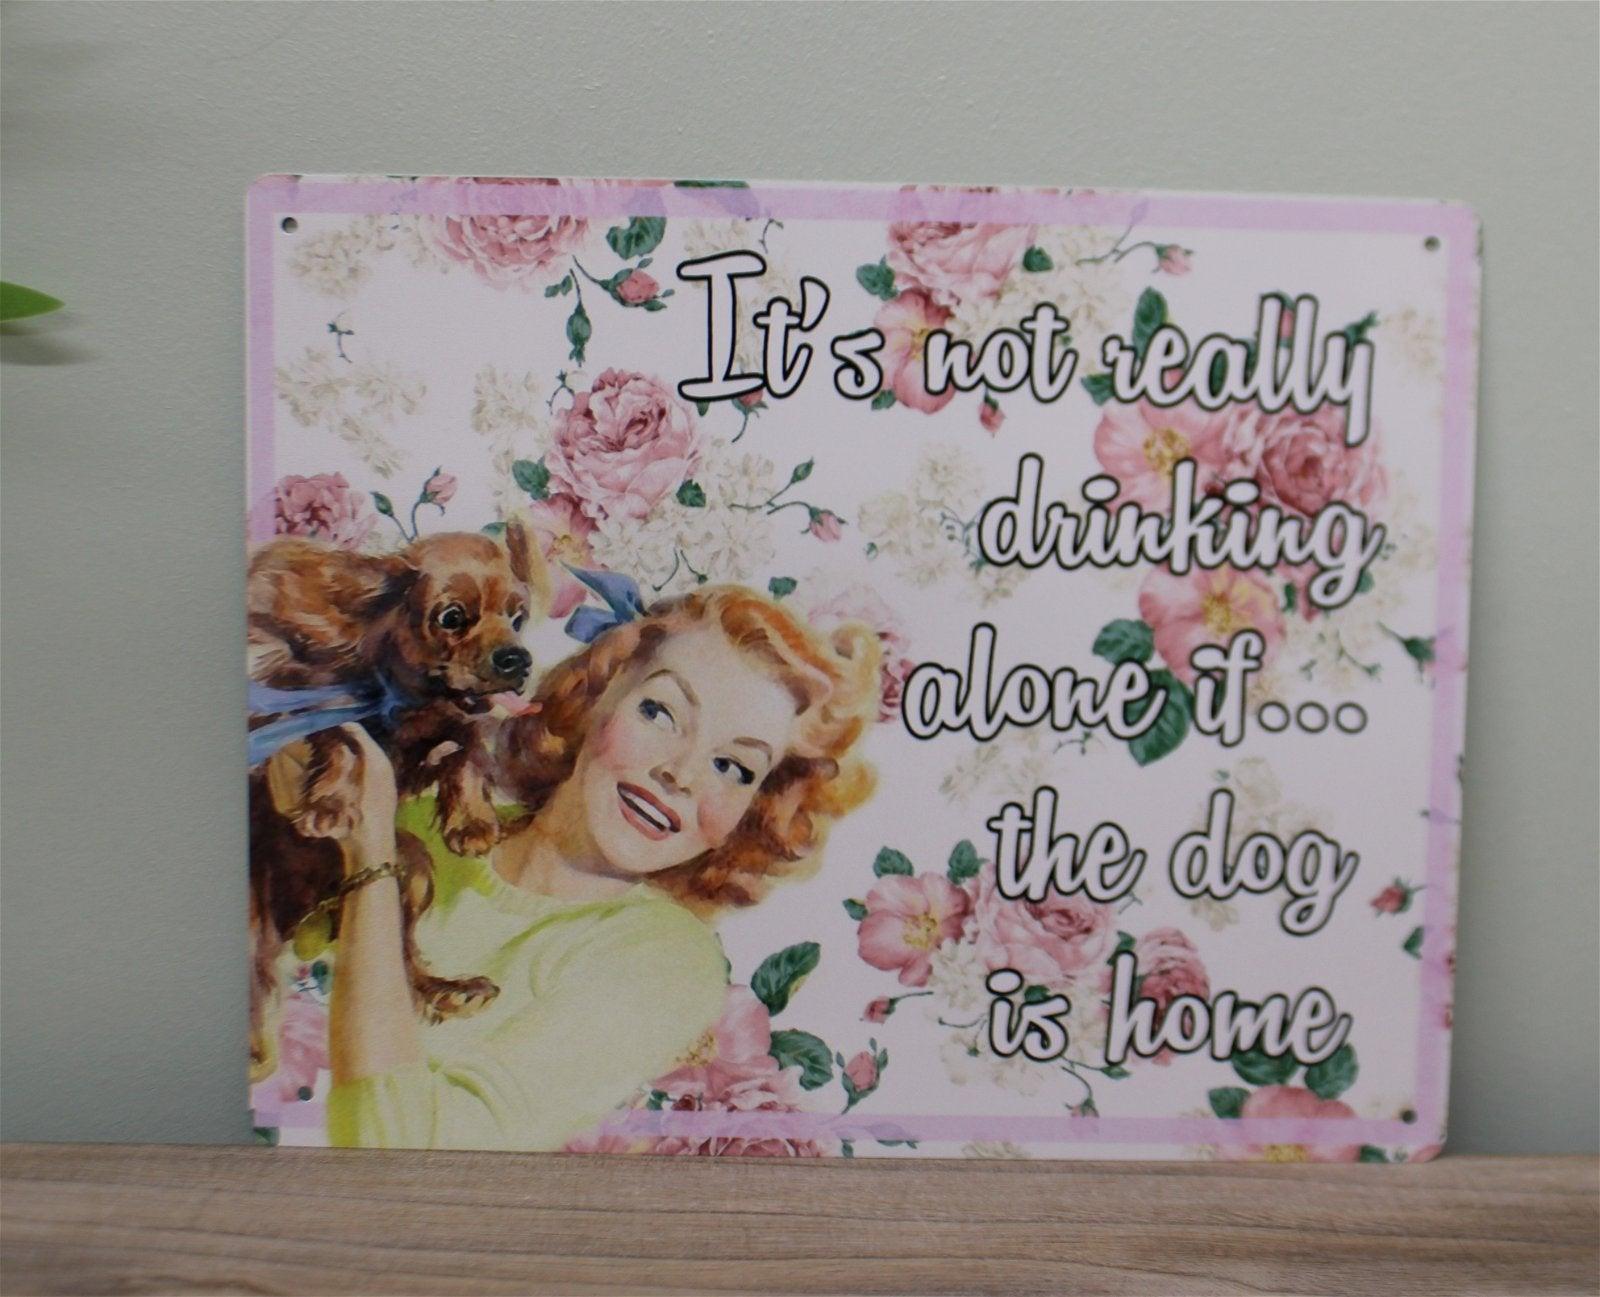 View Vintage Metal Sign Retro Art Its Not Really Drinking Alone If The Dog Is Home information